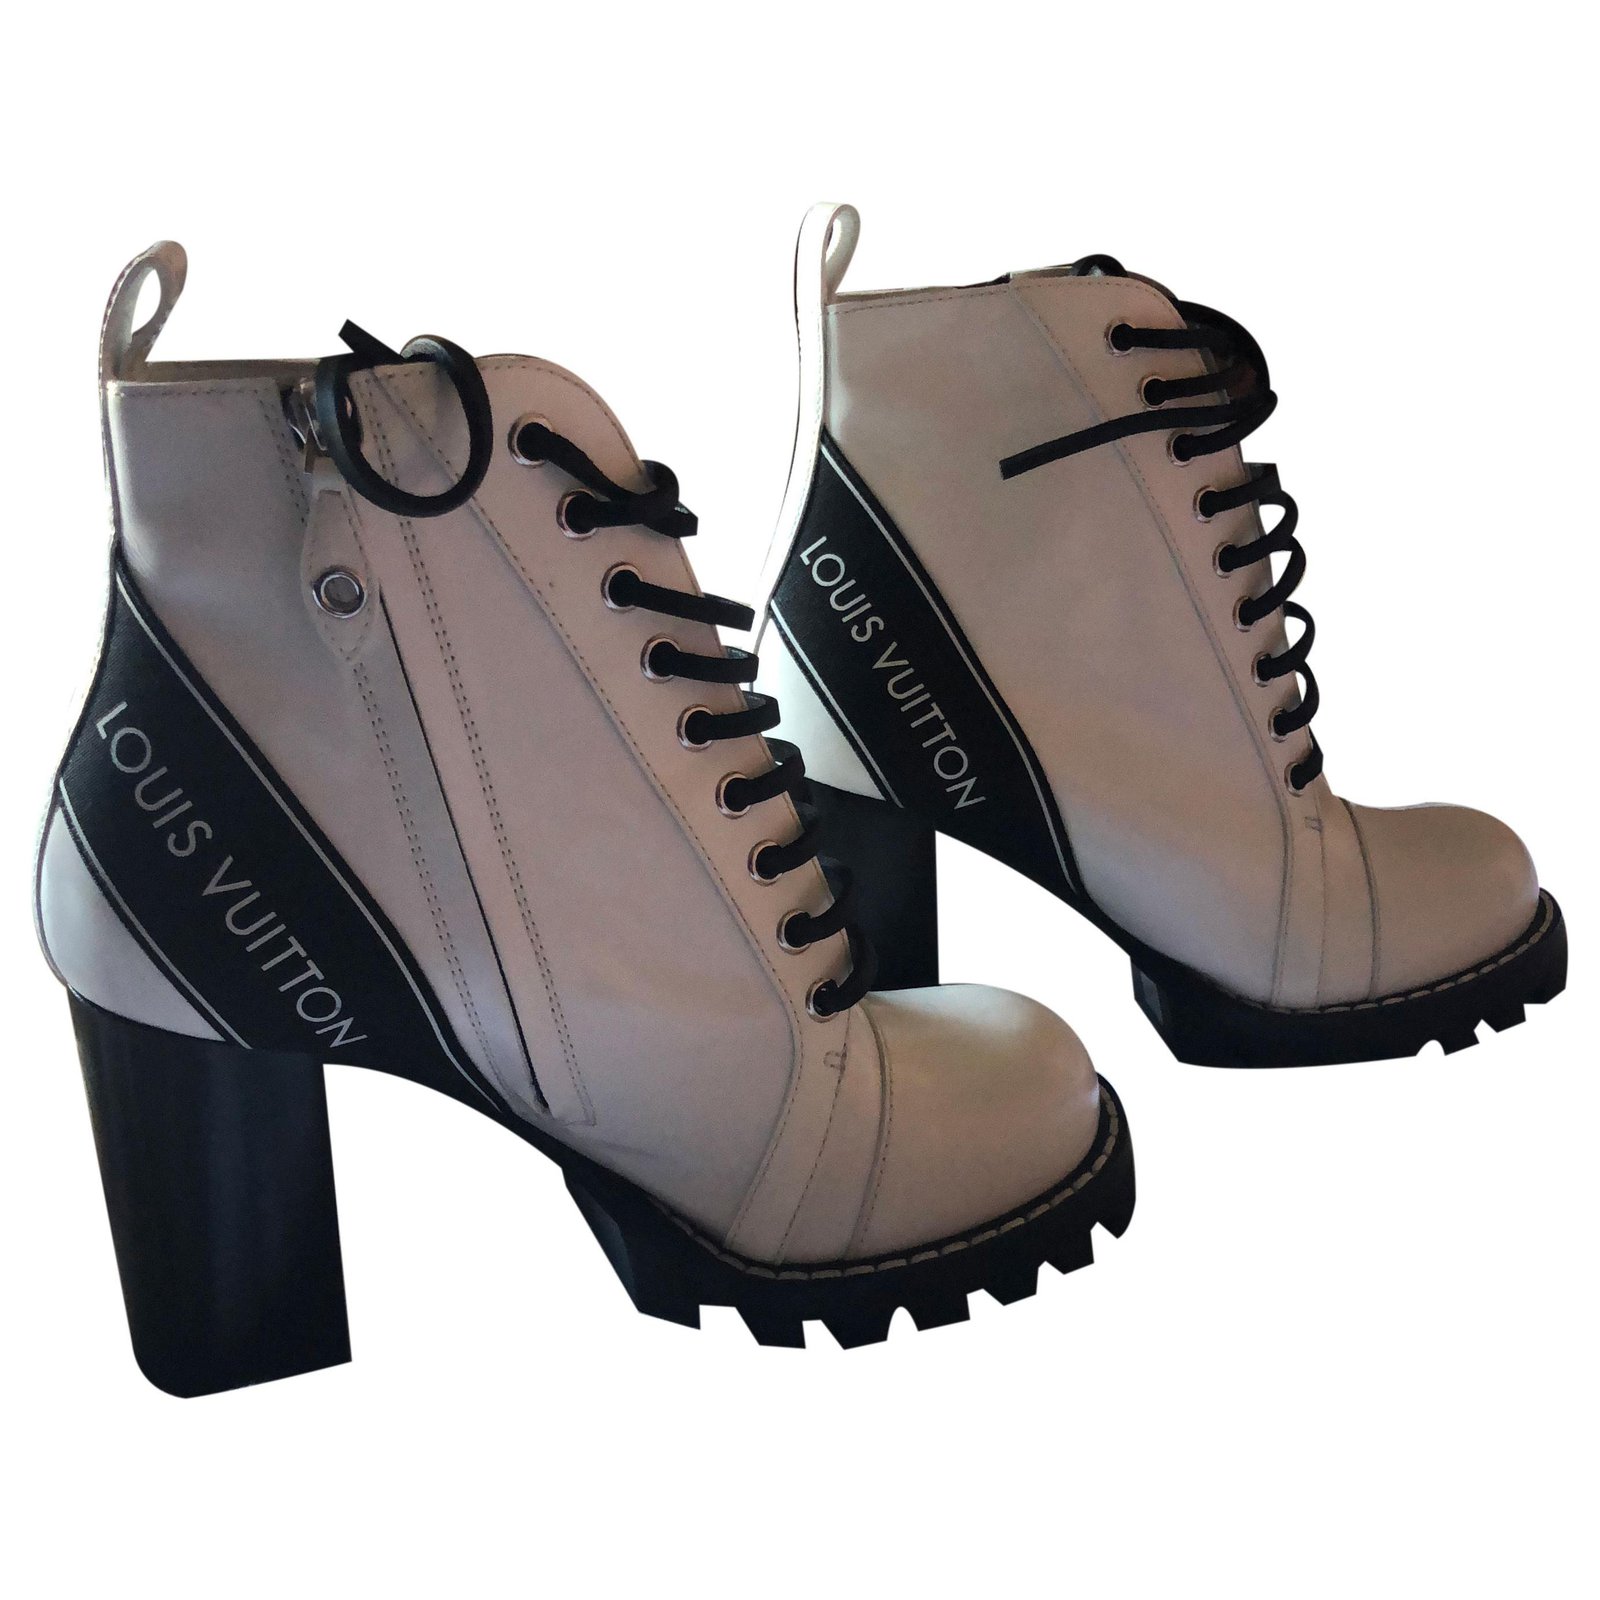 Star Trail Ankle Boot - Shoes